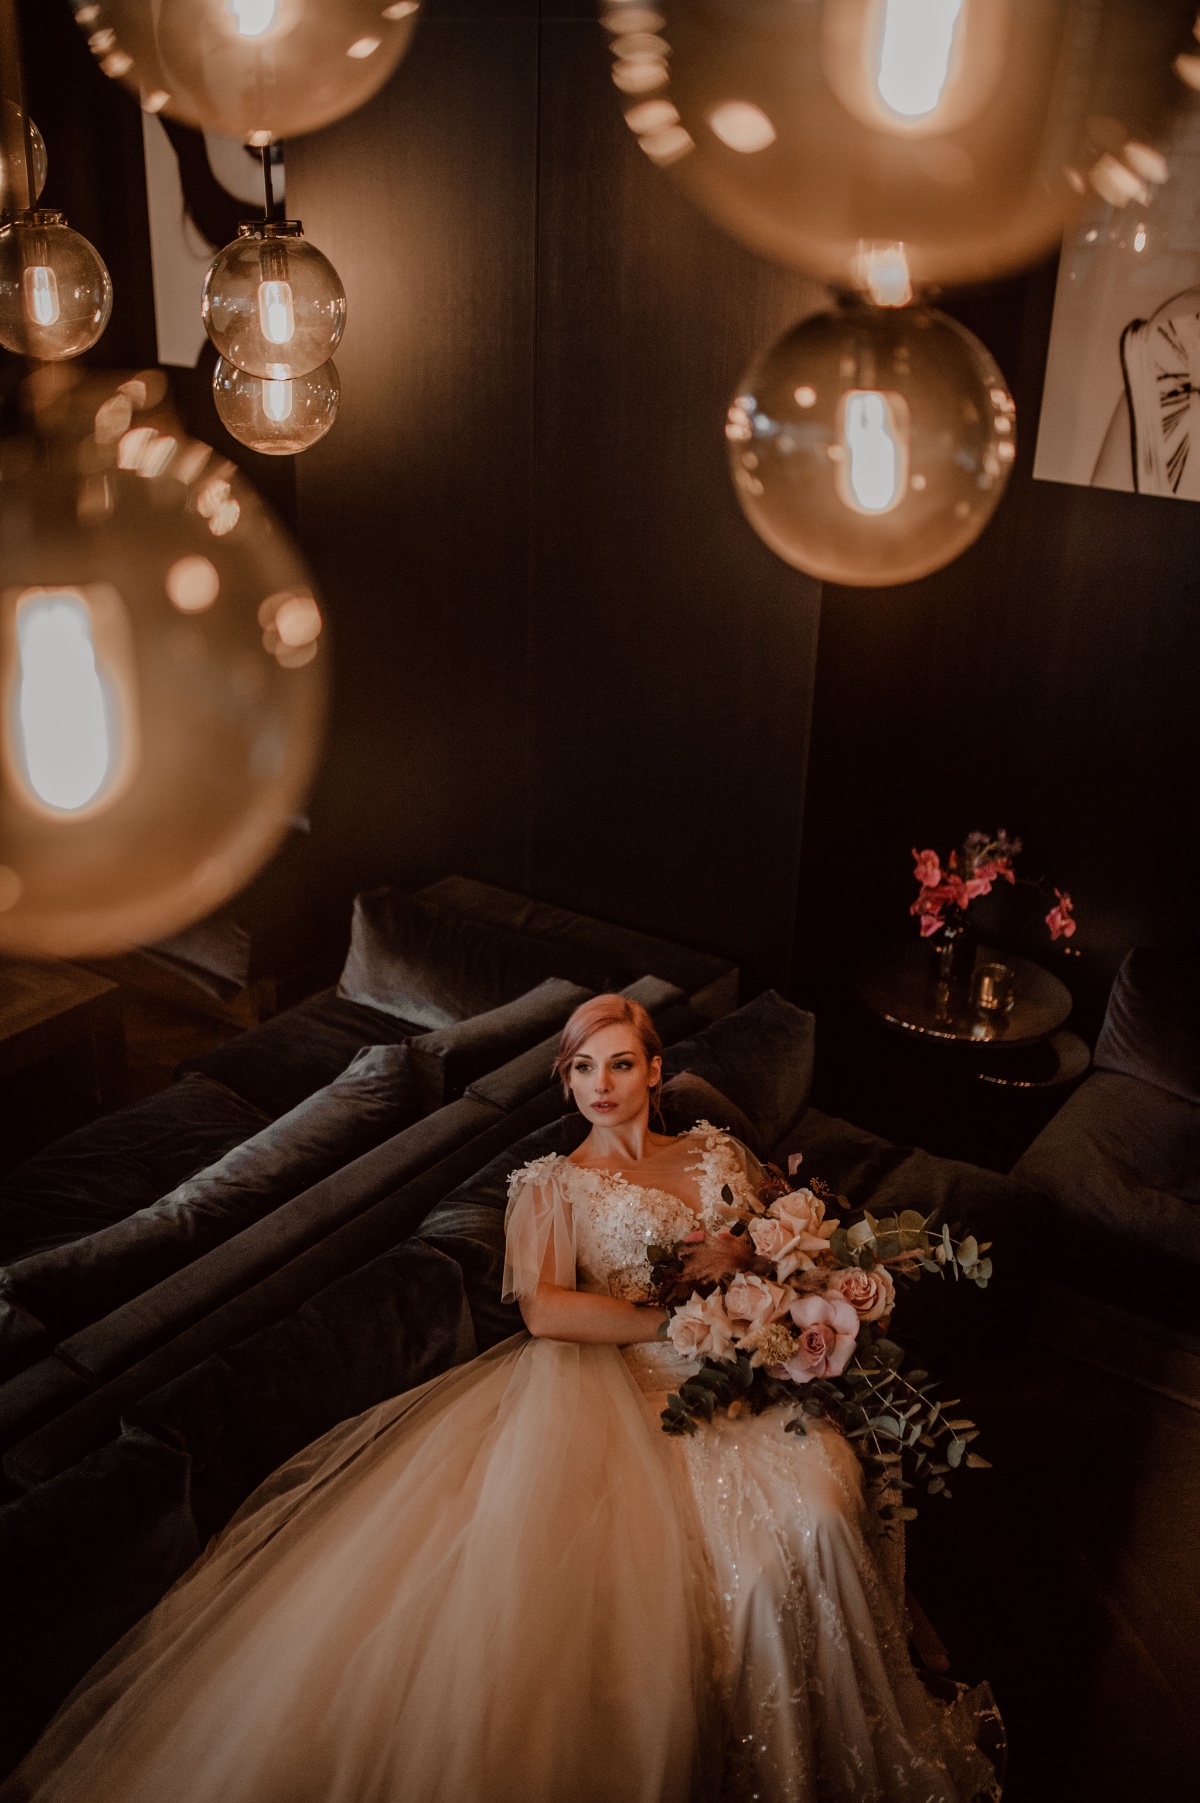 Why Wear Once What You Could Wear Twice...And Other Great Reasons To Have An After-Wedding Shoot